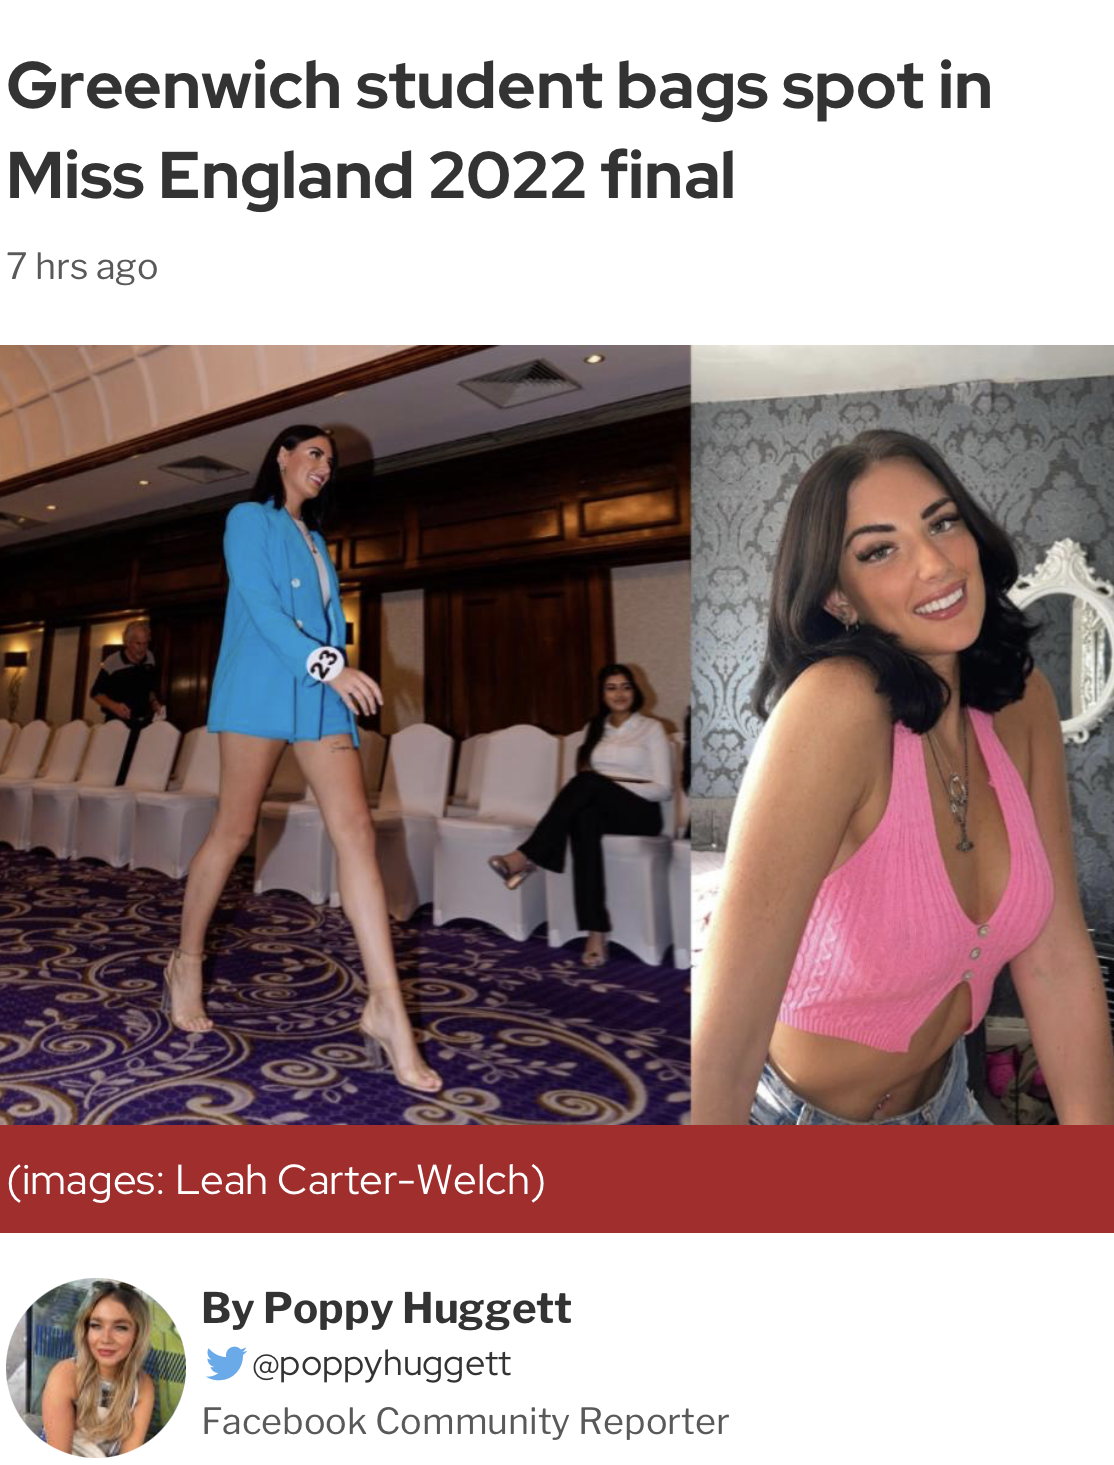 Miss England Finalist Leah -Carter-Welch in the news